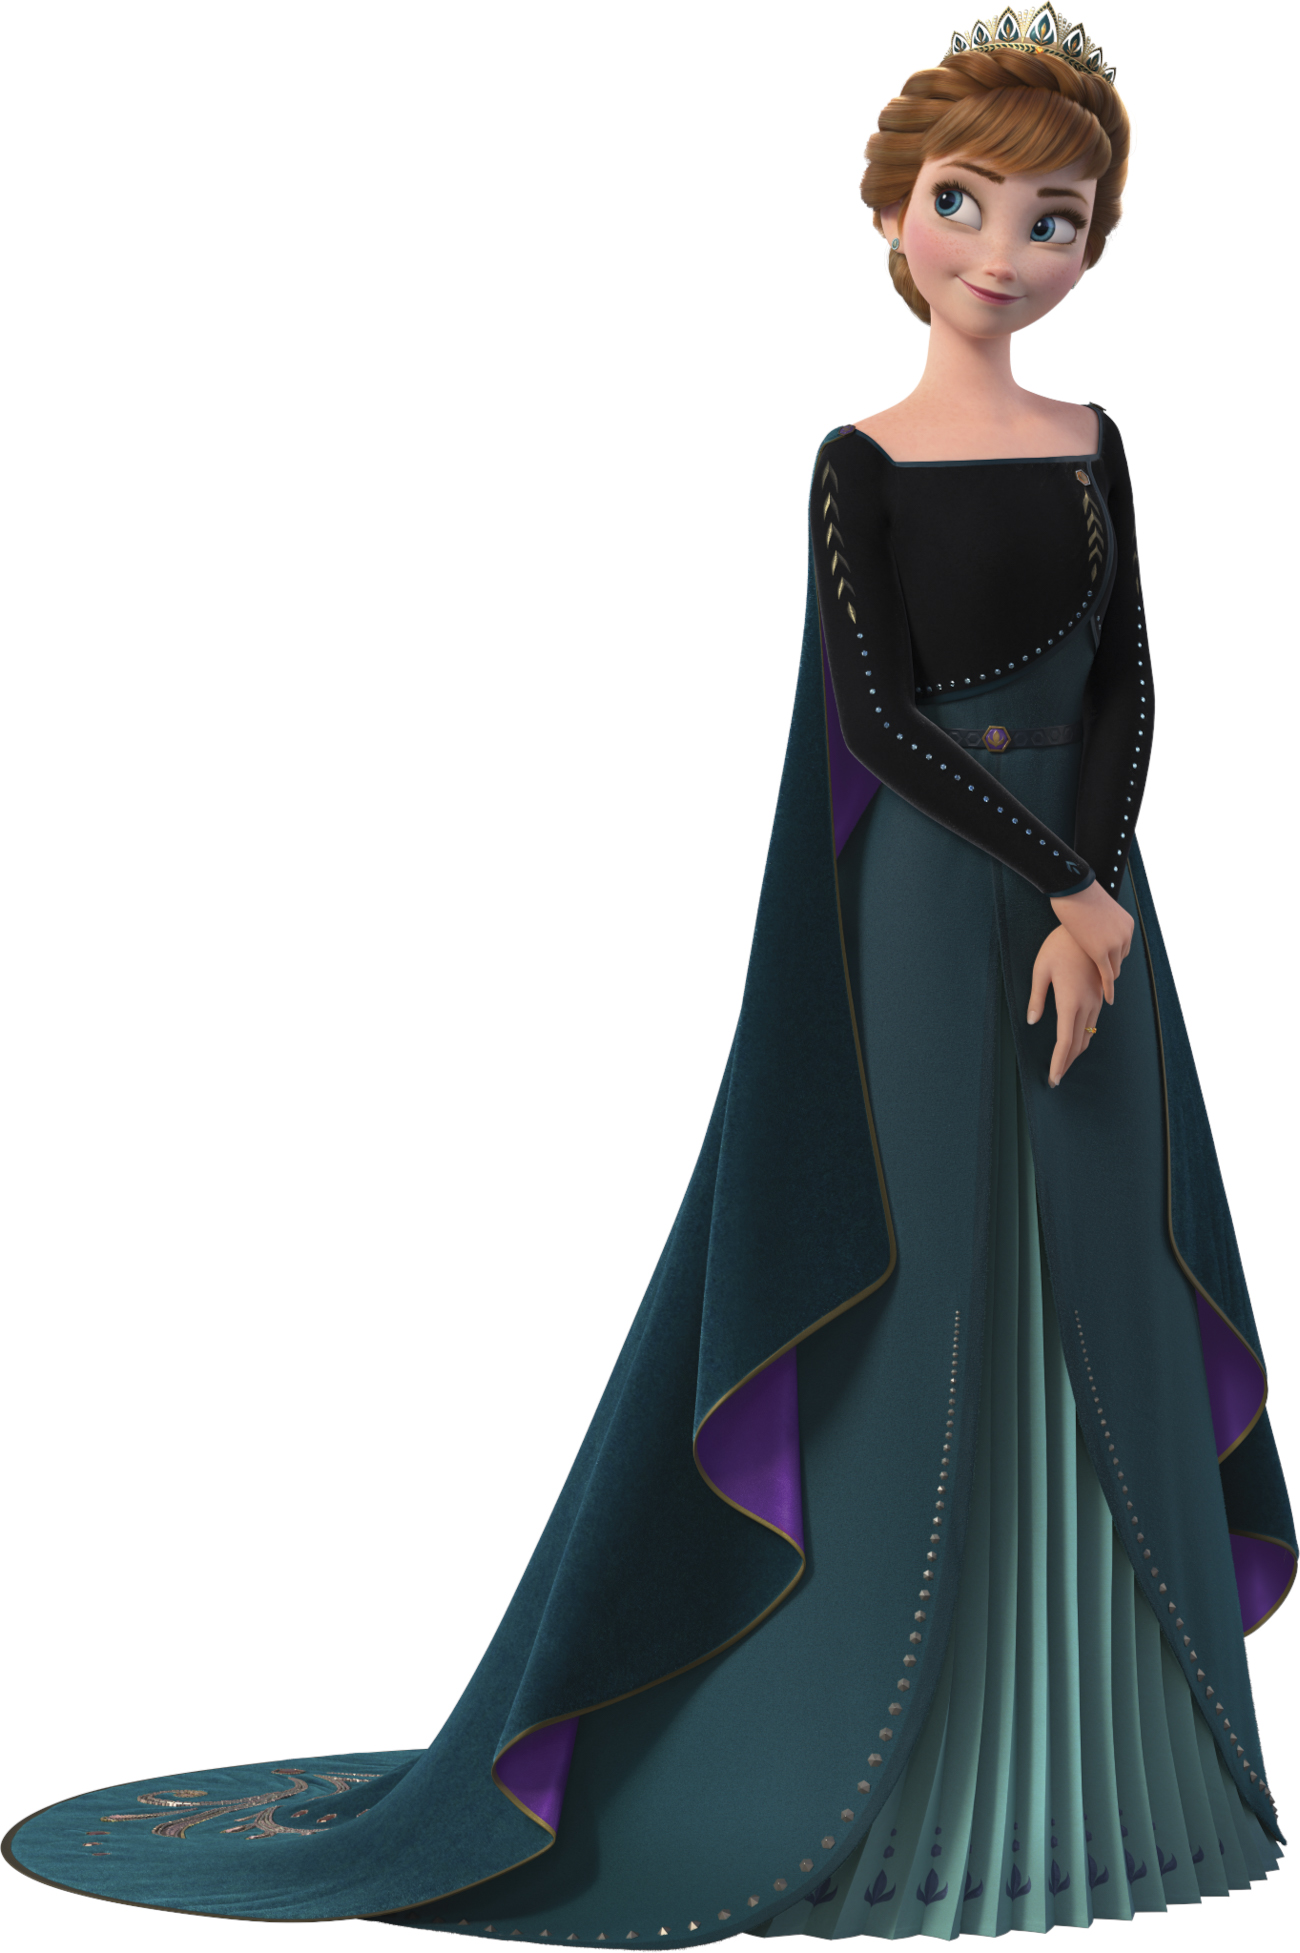 Images Of Anna From Frozen 2 vanessa lane